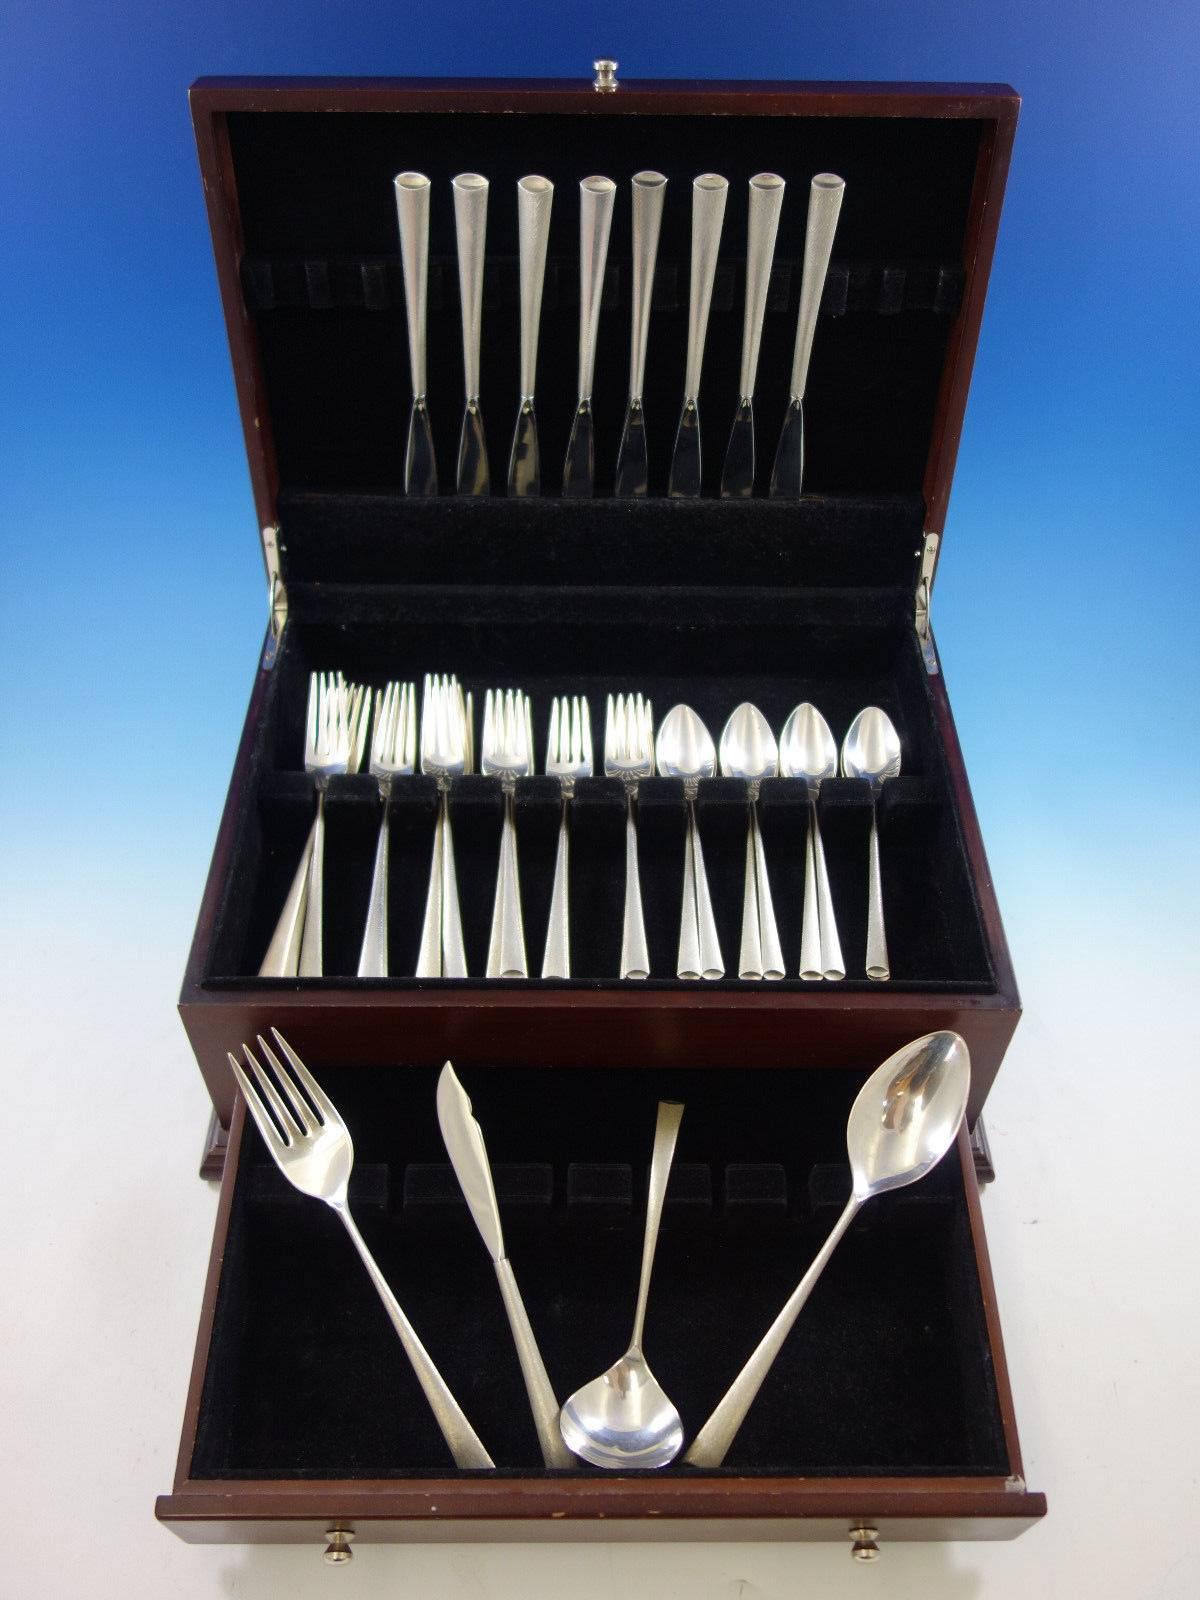 Royal satin by Wallace sterling silver flatware set - 36 pieces. This set includes: 

eight knives, 9